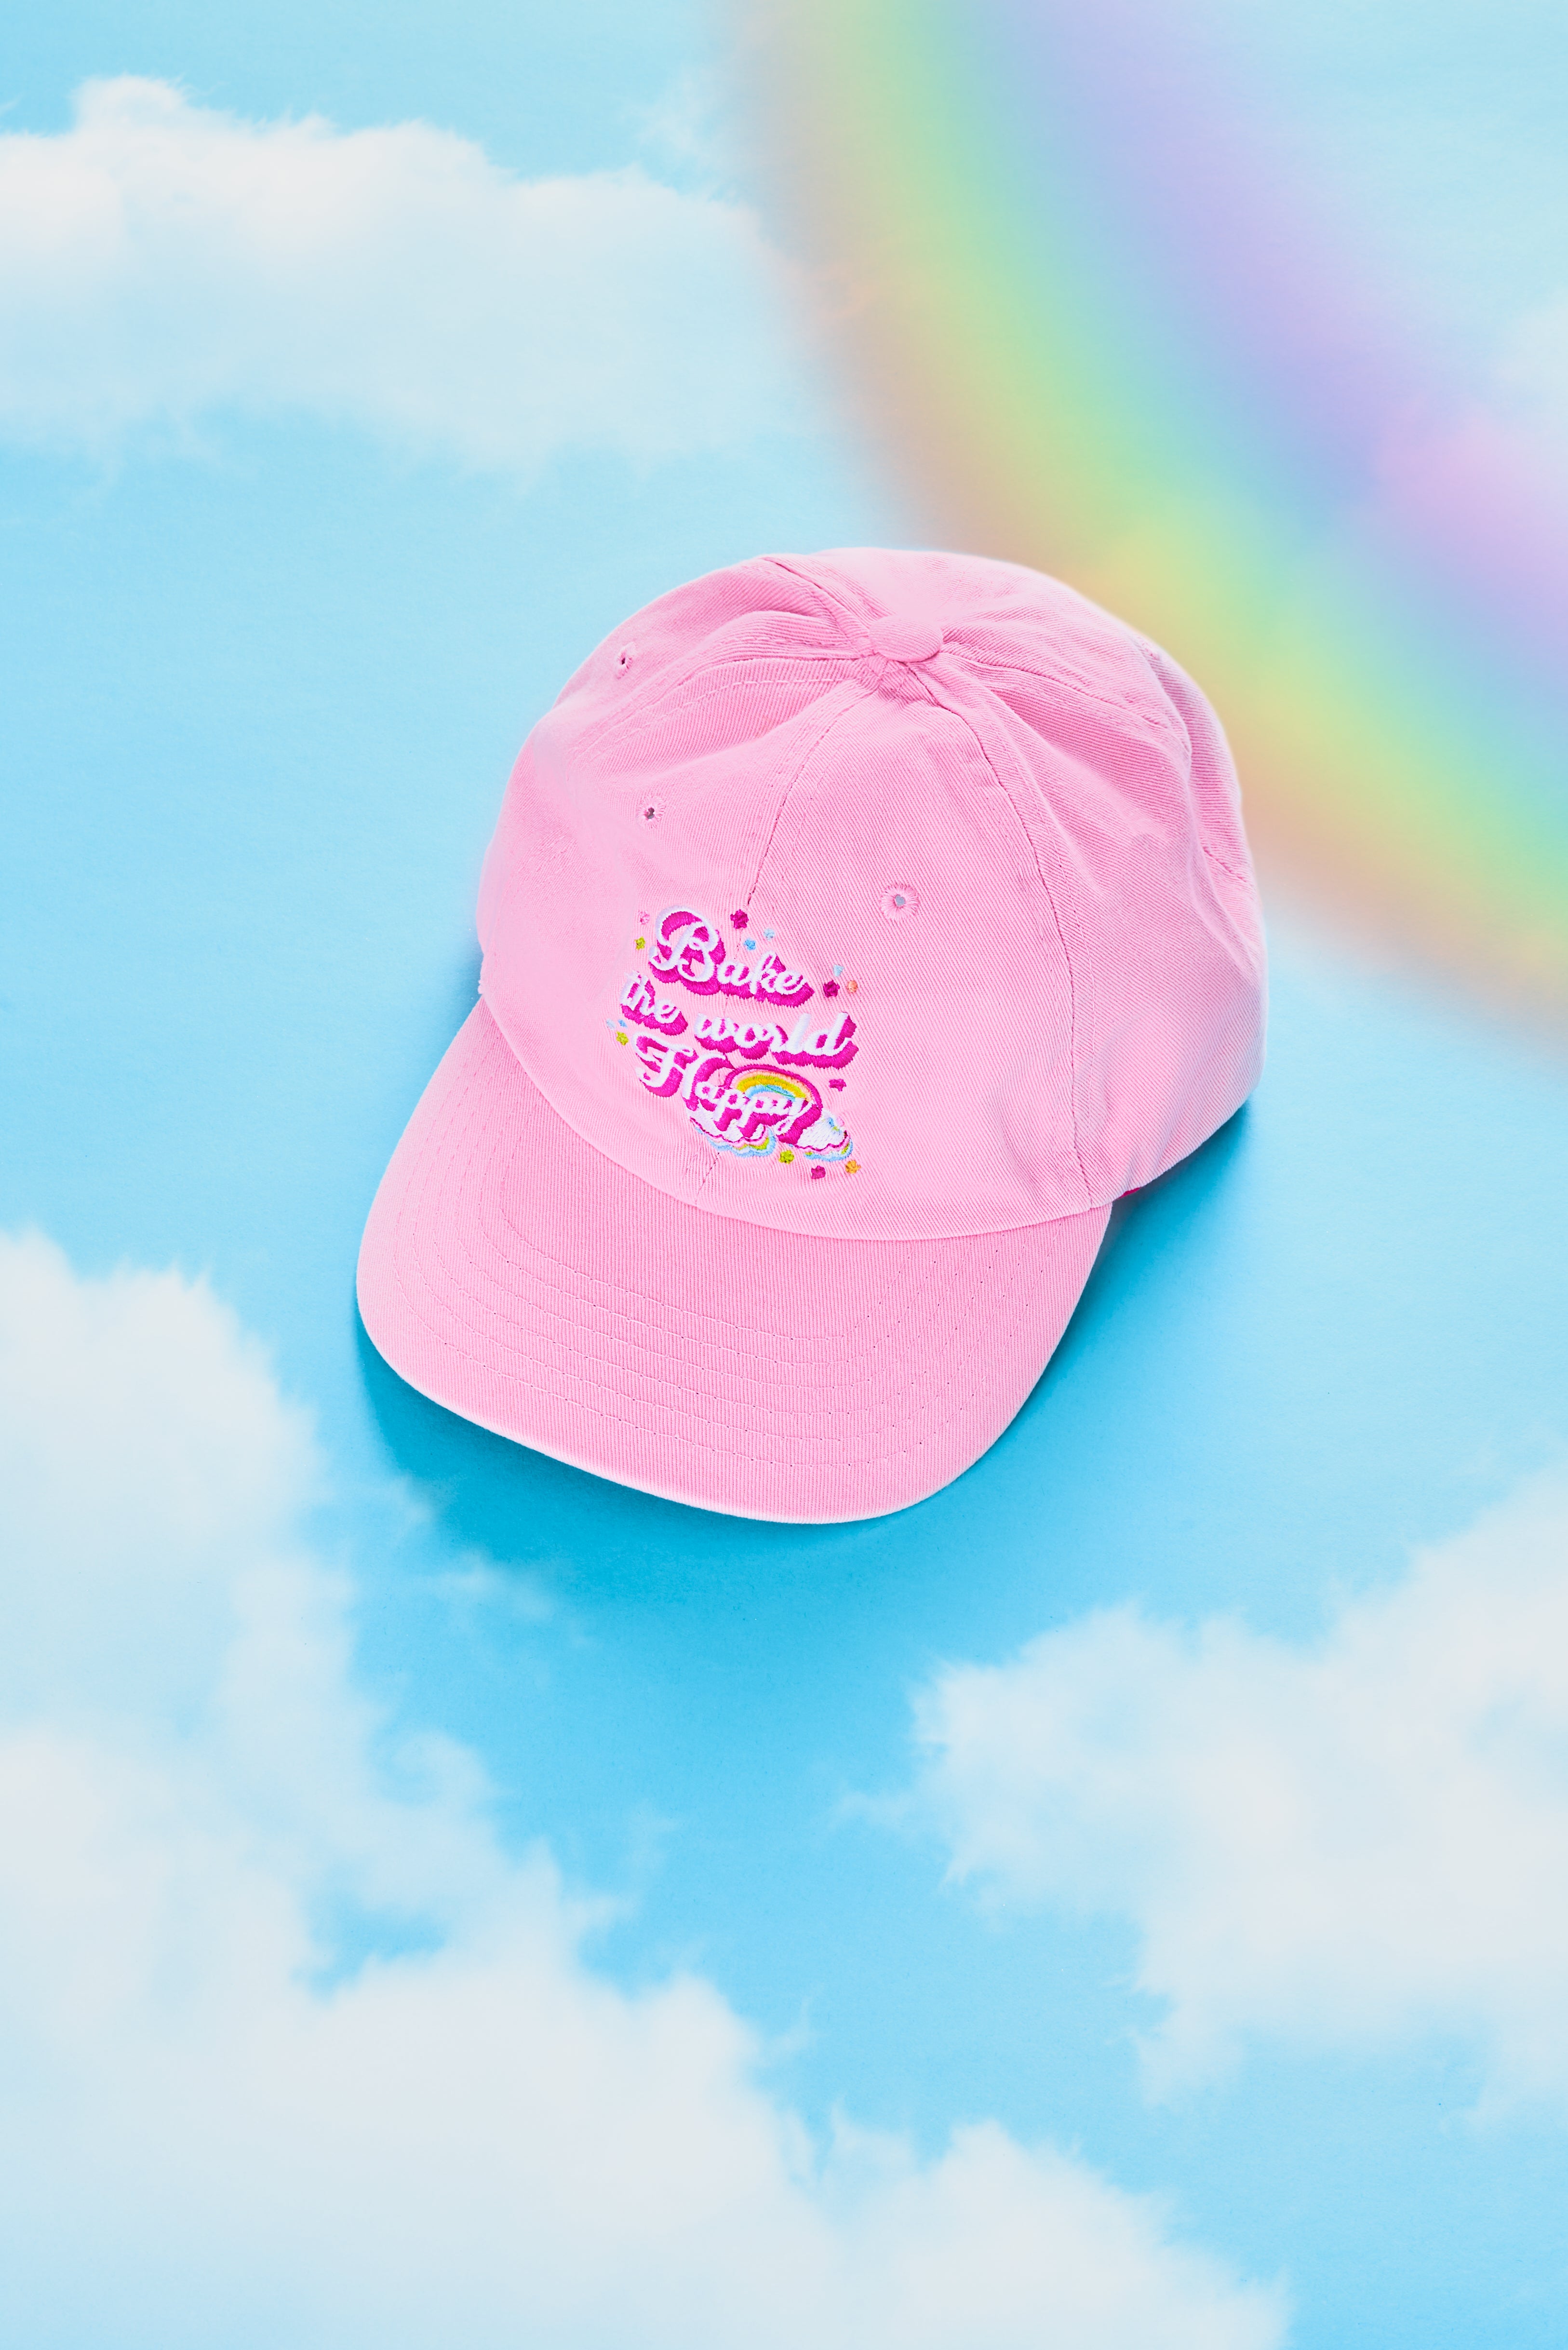 Bake The World Happy Pink Hat